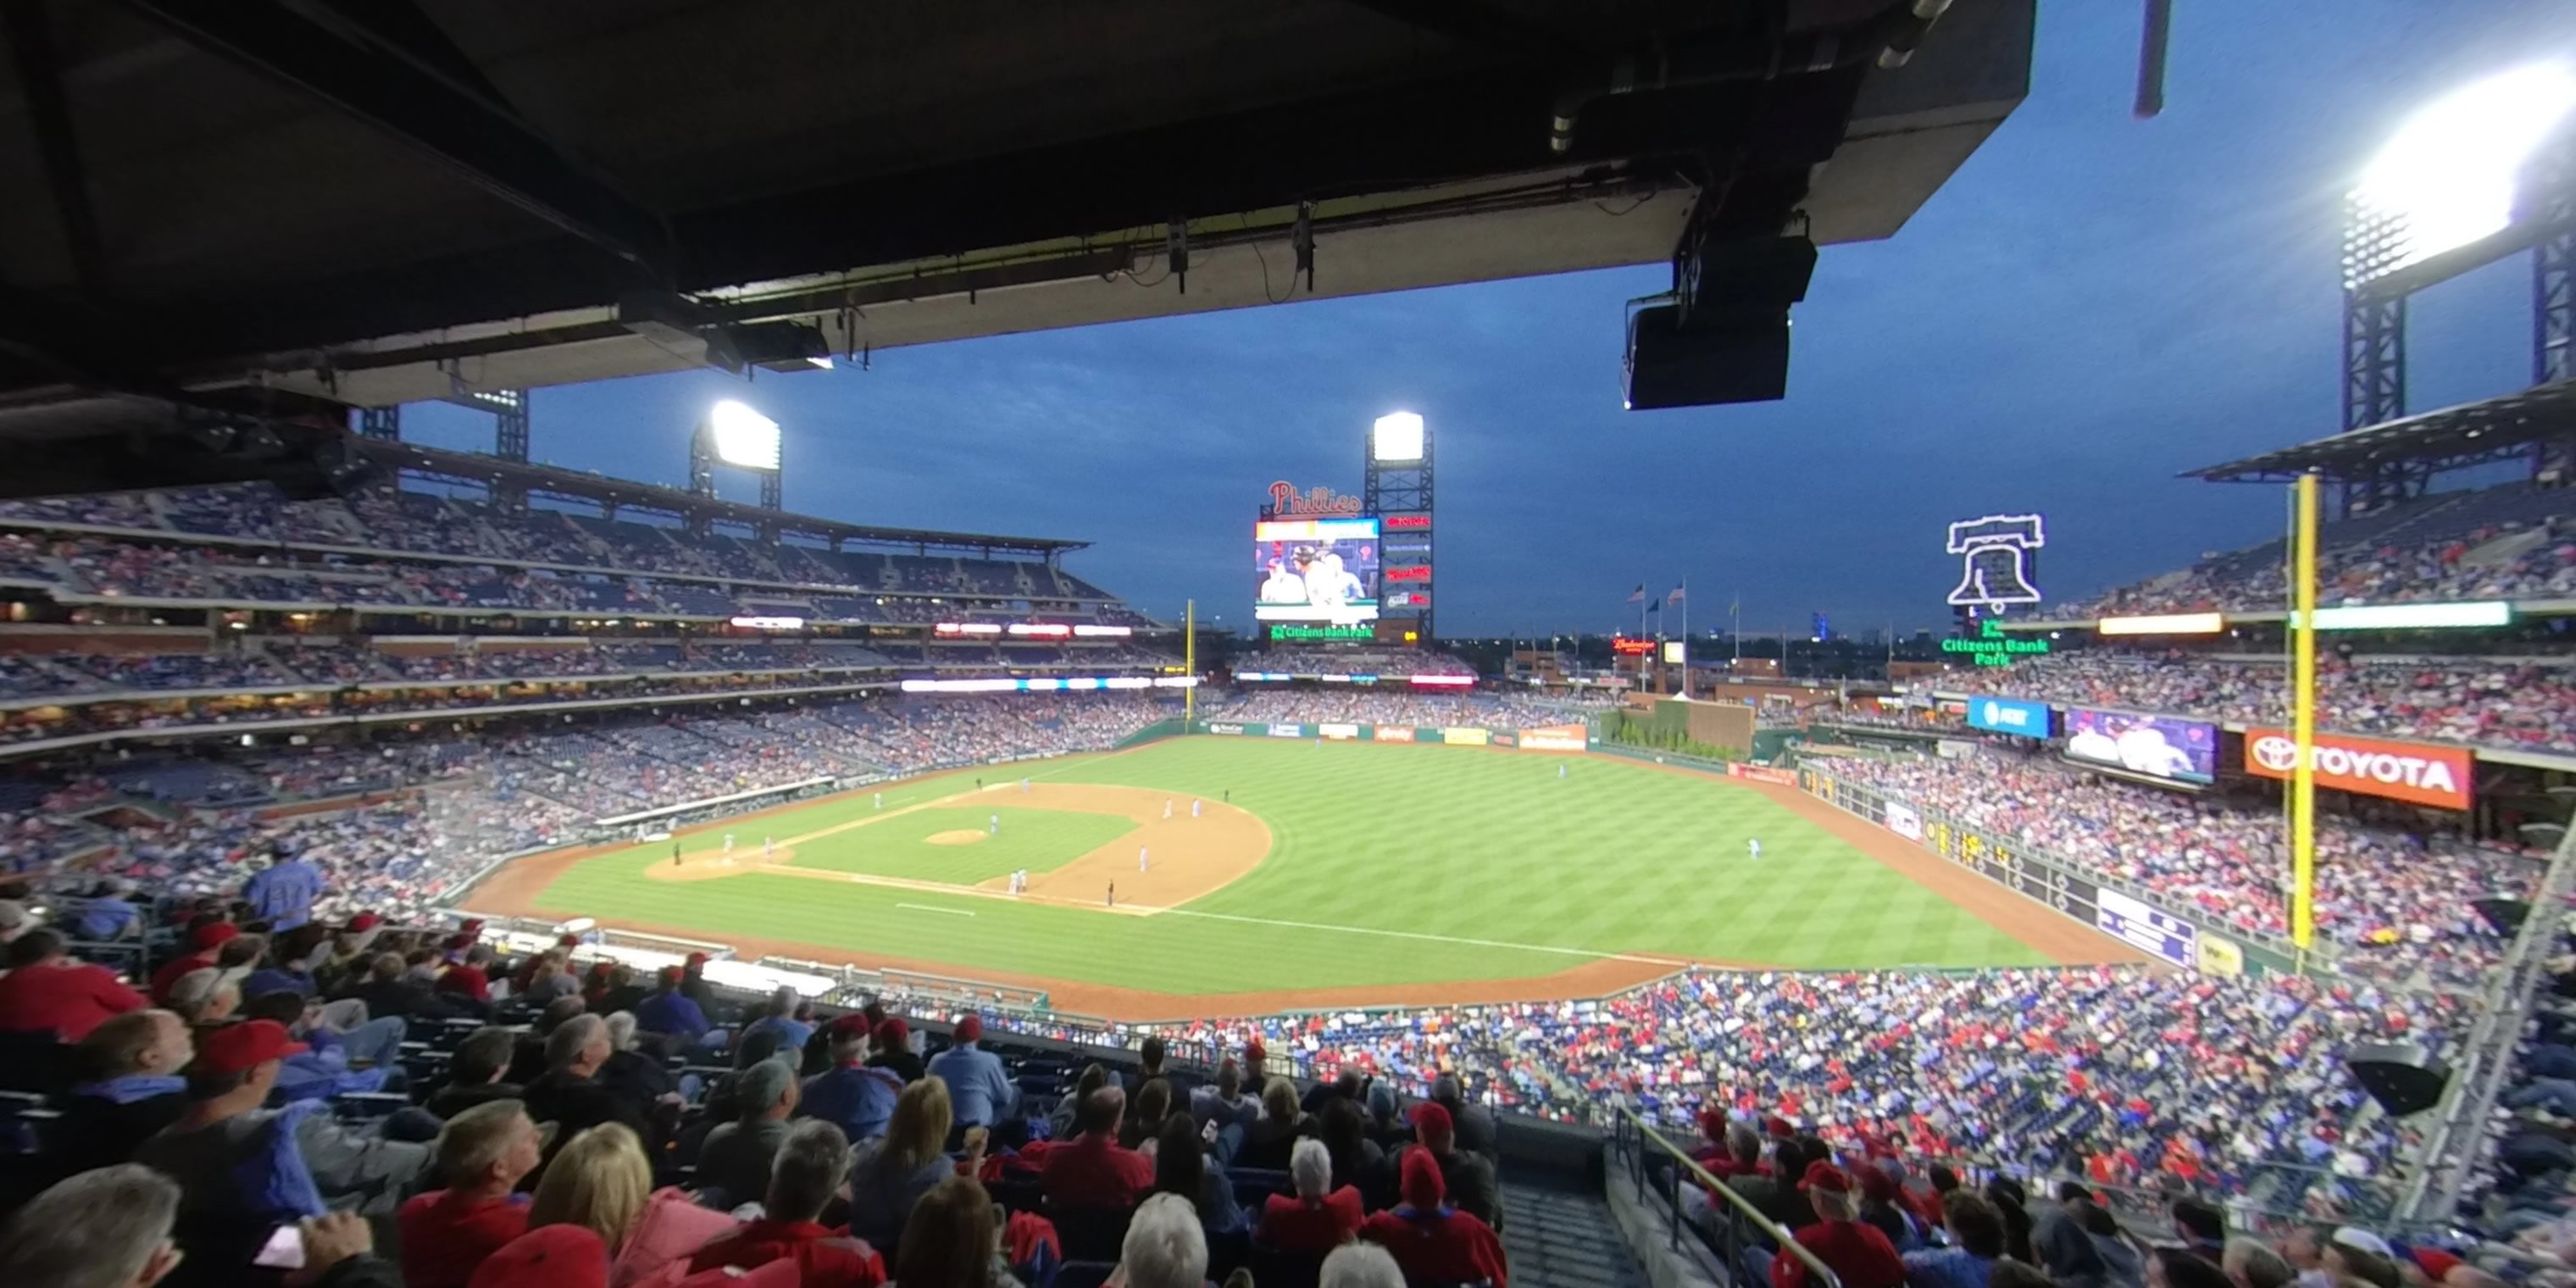 section 211 panoramic seat view  for baseball - citizens bank park